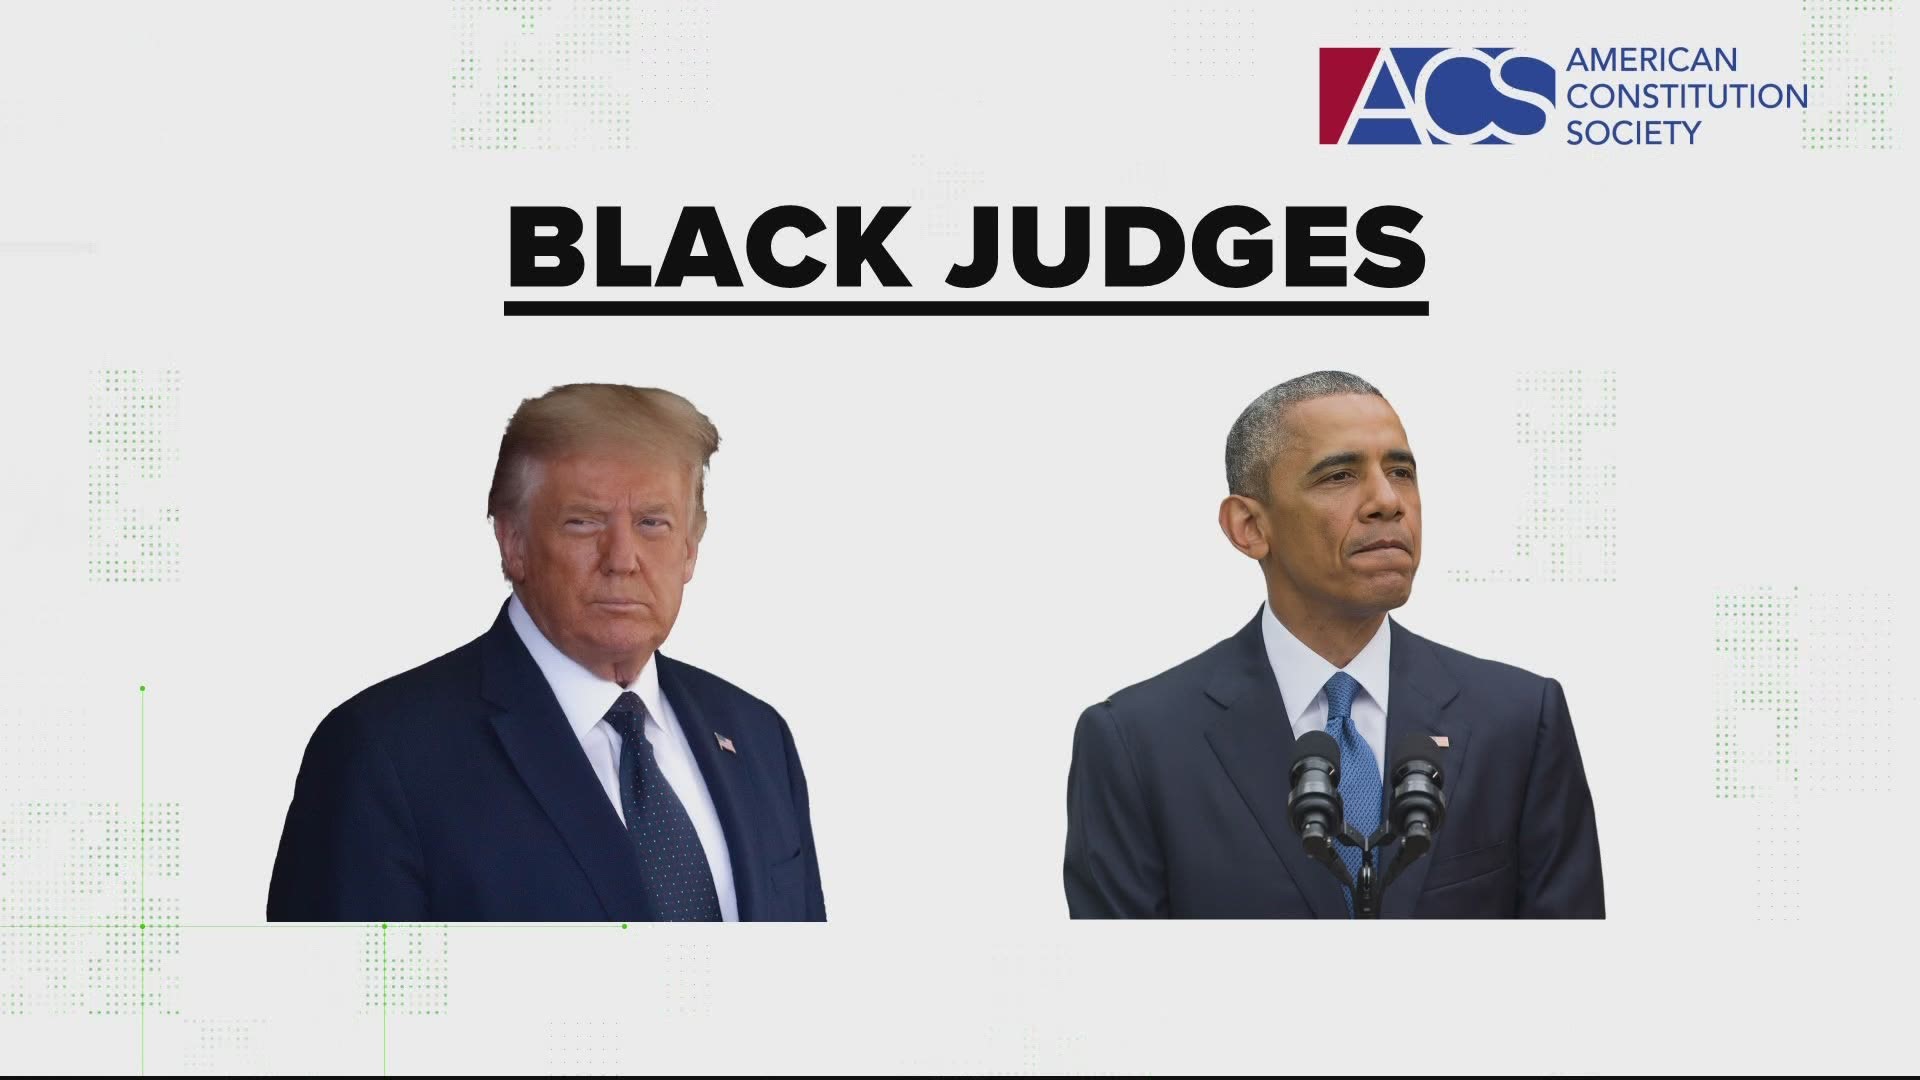 The administration has confirmed a much smaller number of black judges to the federal bench than previous administrations, but not zero.